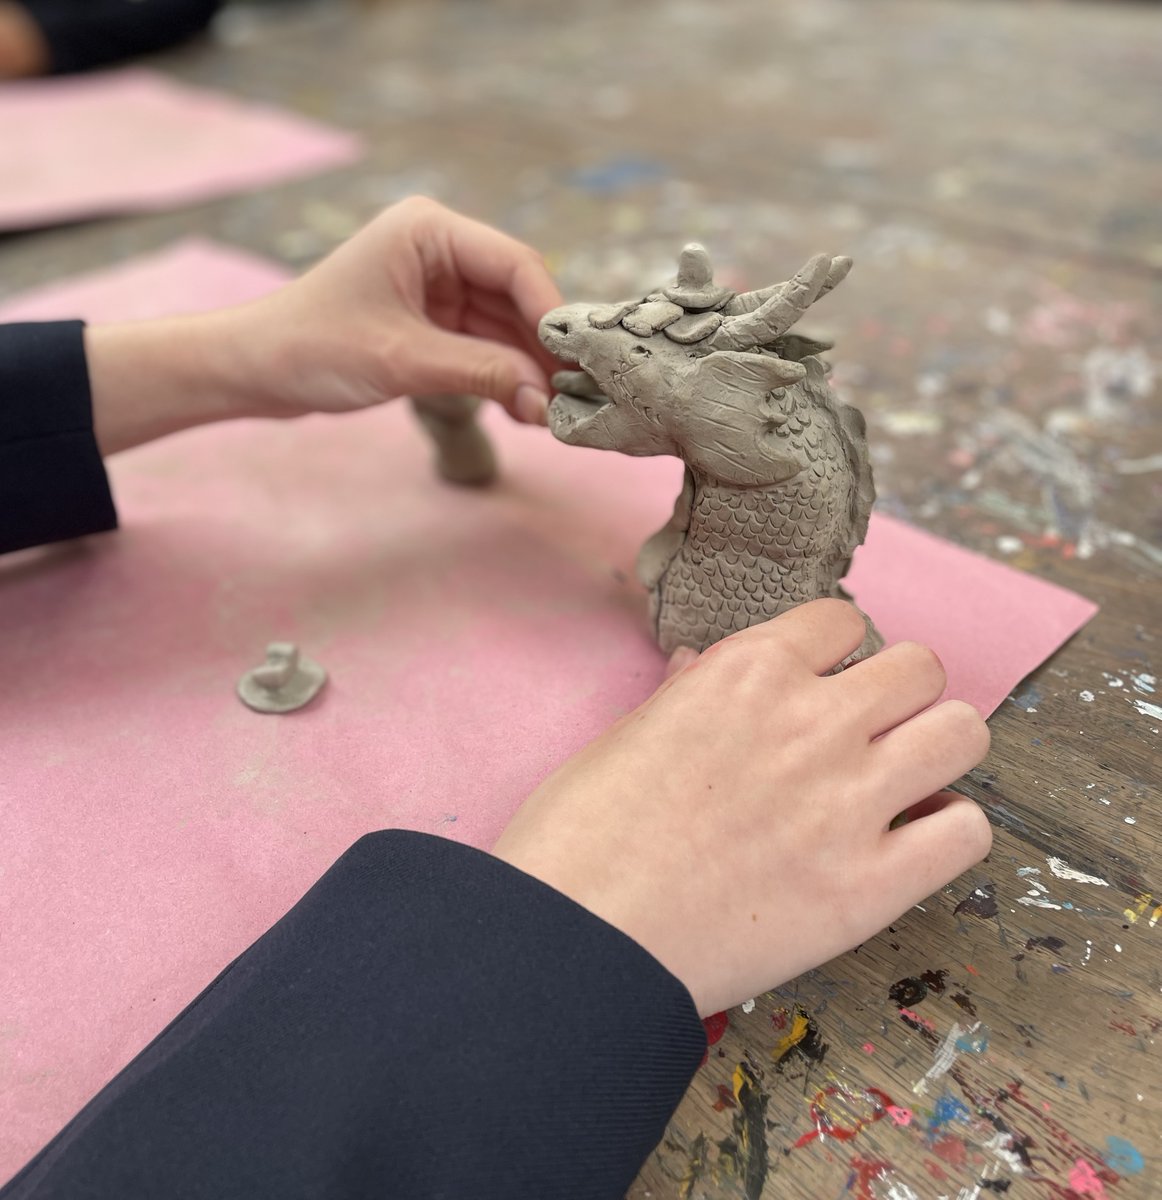 Year 9 students have been busy designing mythical creatures in art class and turning their designs into 3D using clay. Some wonderfully imaginative creations are coming to life! #artclass #mythicalcreatures @ArtLawes